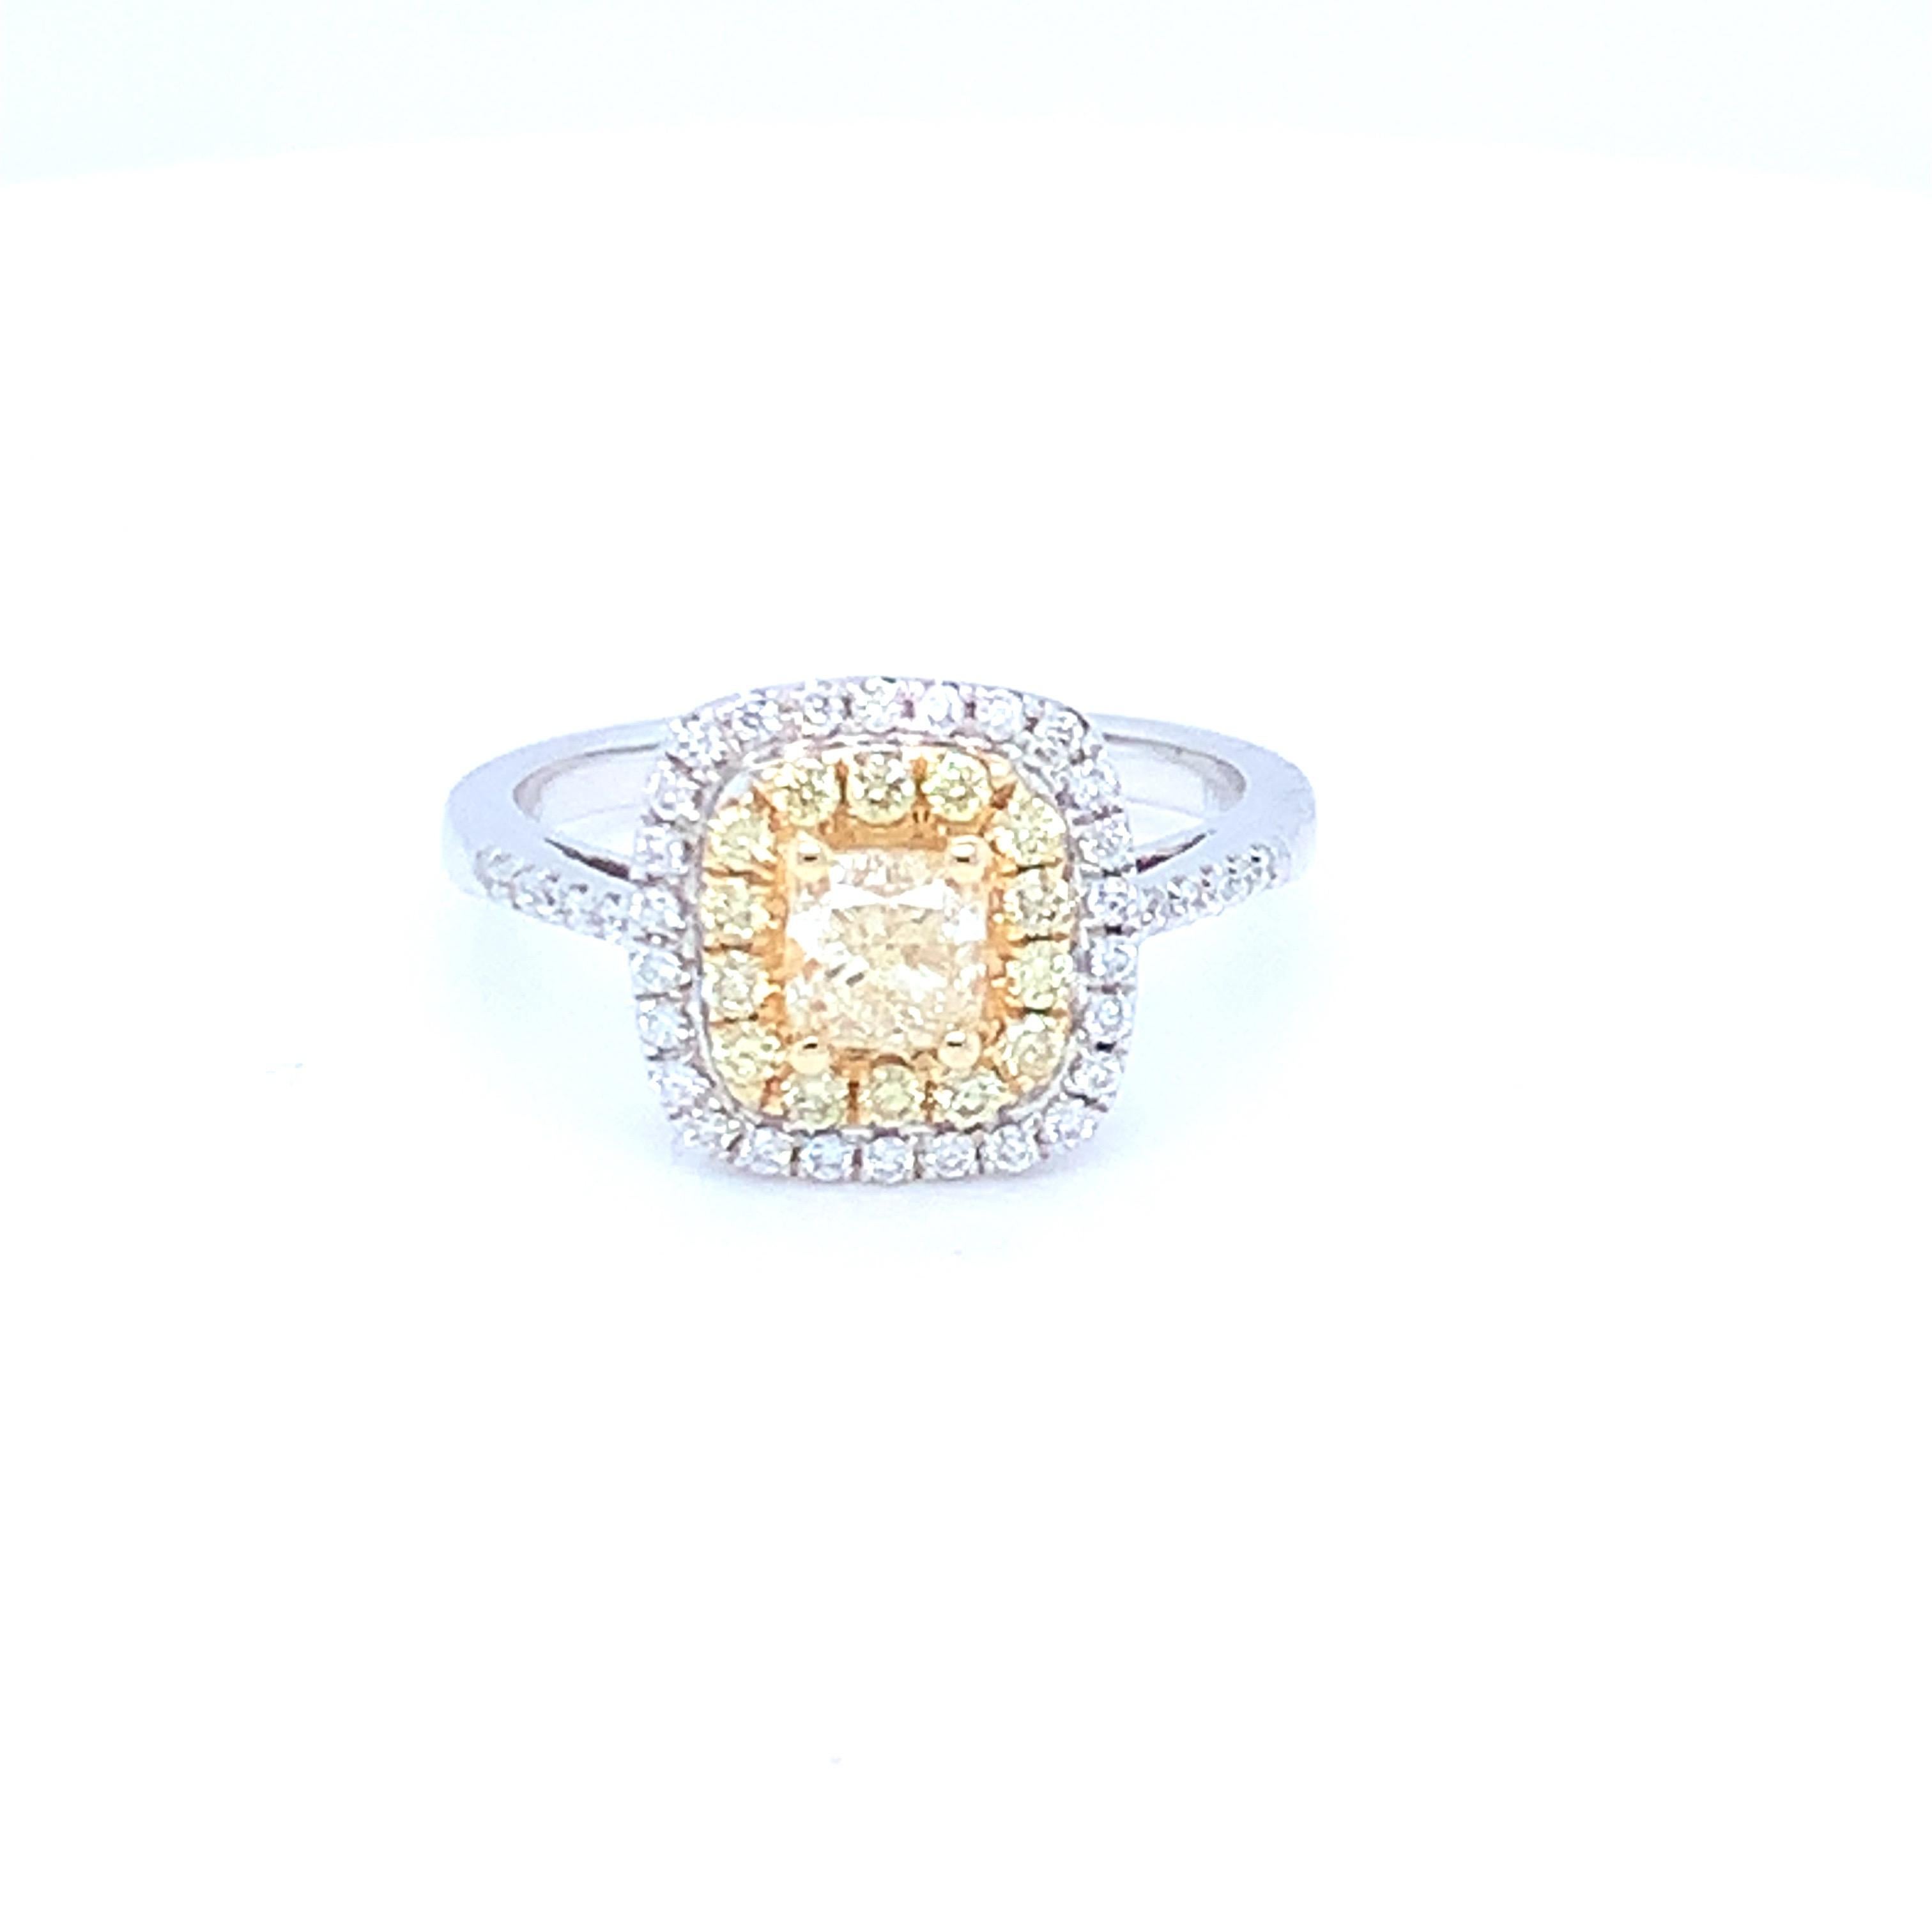 This lovely ring features a halo design in yellow and white diamonds. Set in two tone gold to match the two tone diamond settings. This piece has been crafted by hand to achieve the finest quality. 
Center yellow diamond: 0.62ct
Yellow diamond: